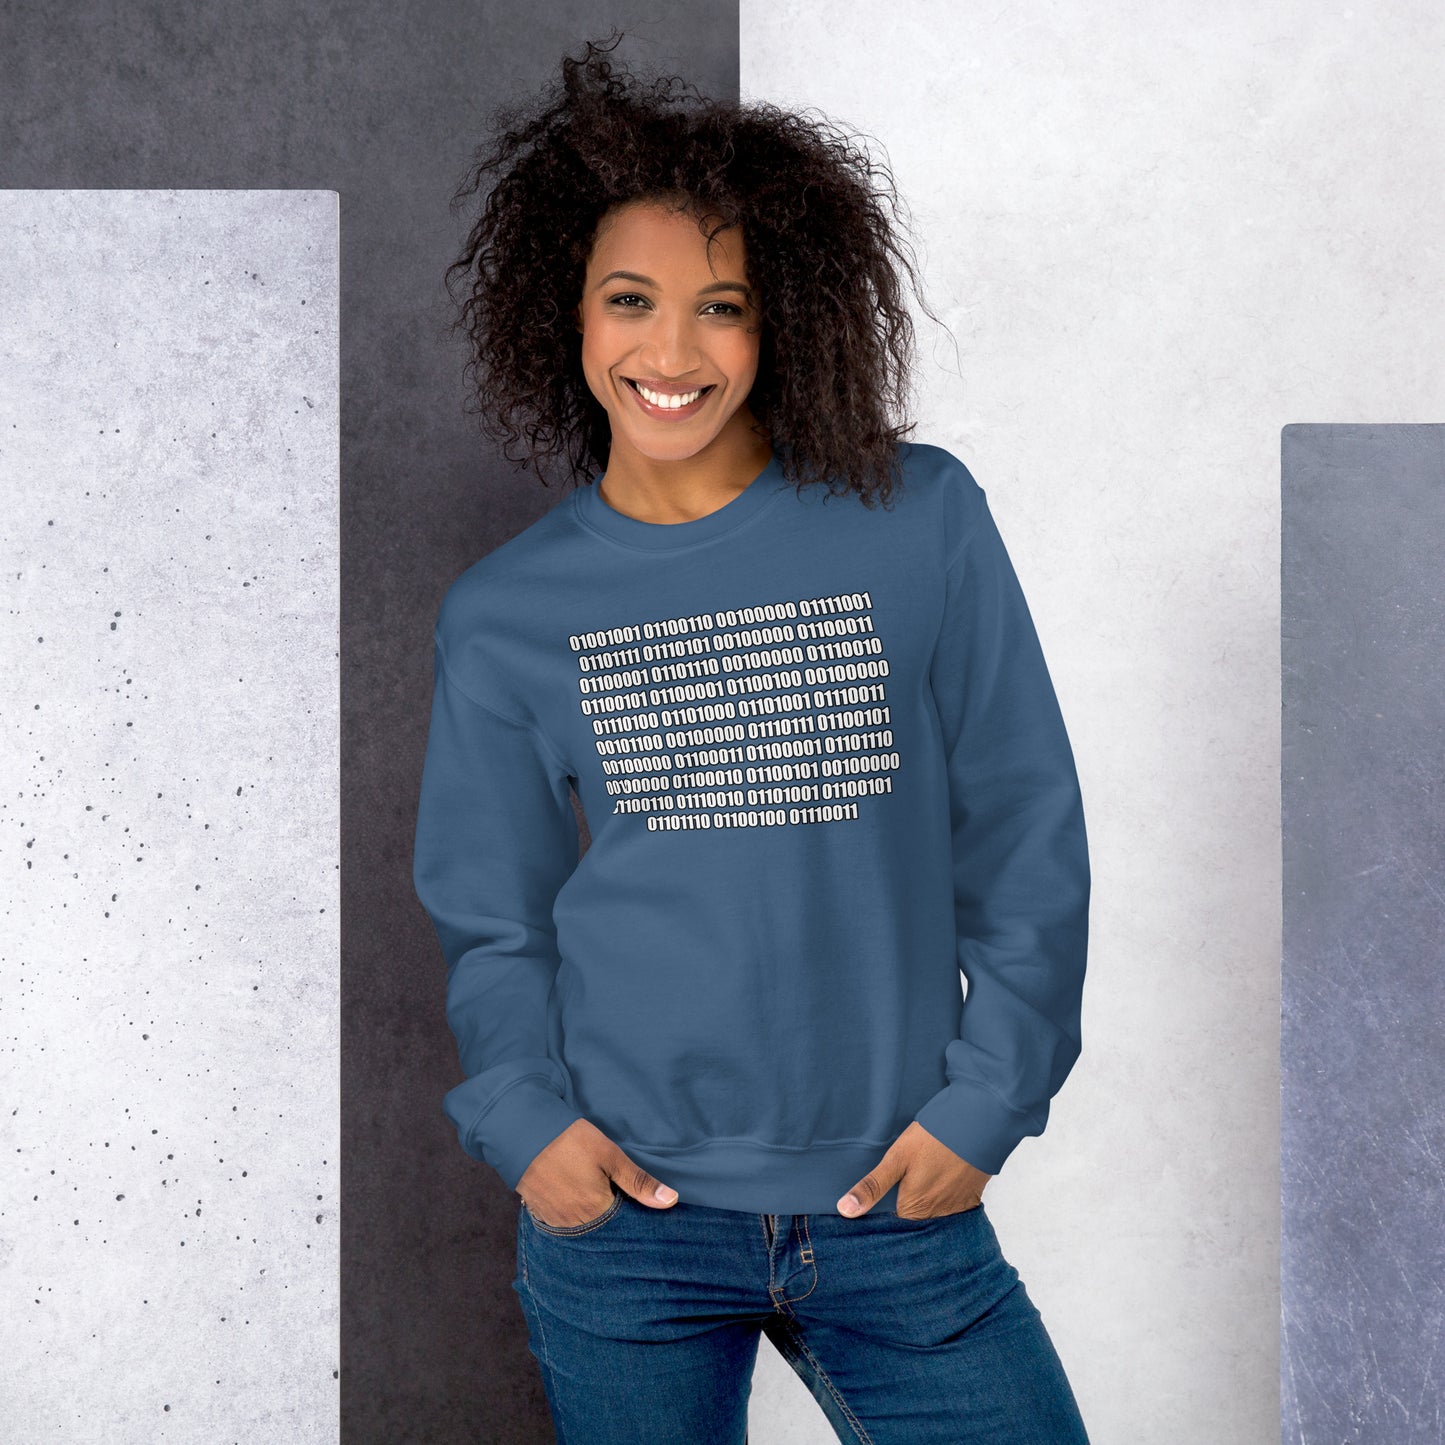 Women with indigo blue sweatshirt with binaire text "If you can read this"